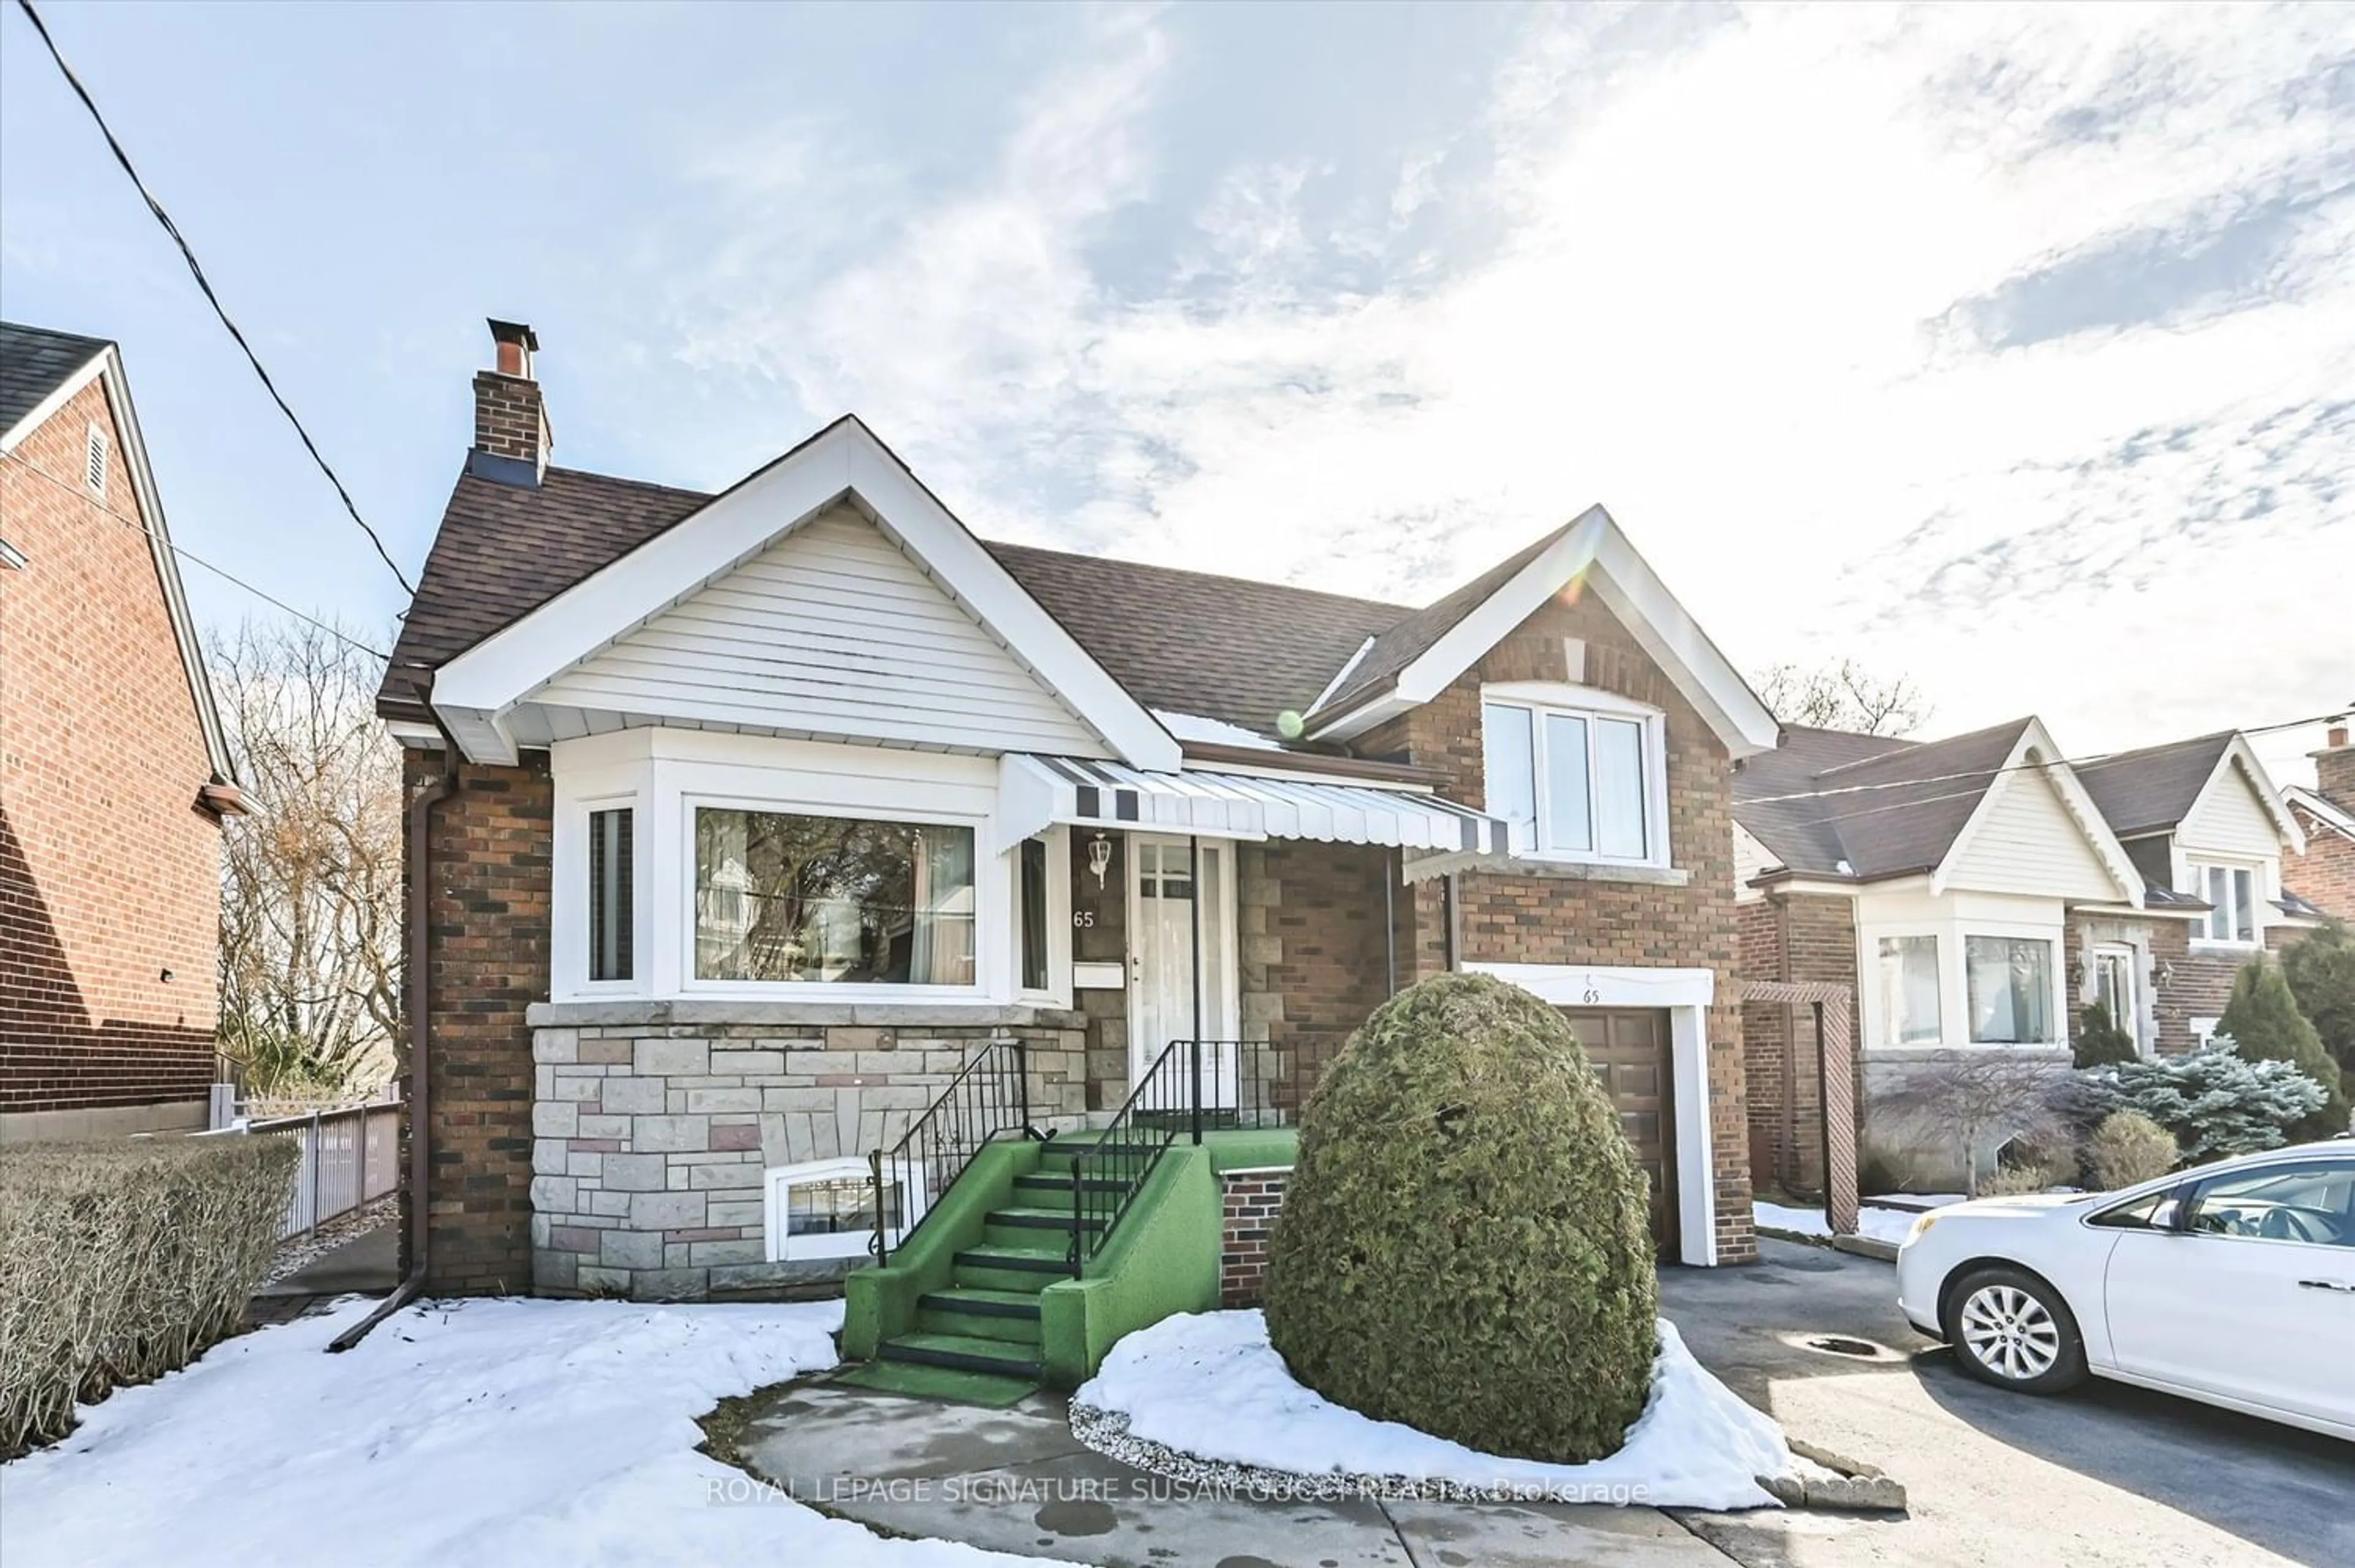 Home with brick exterior material for 65 Glenwood Cres, Toronto Ontario M4B 1J8